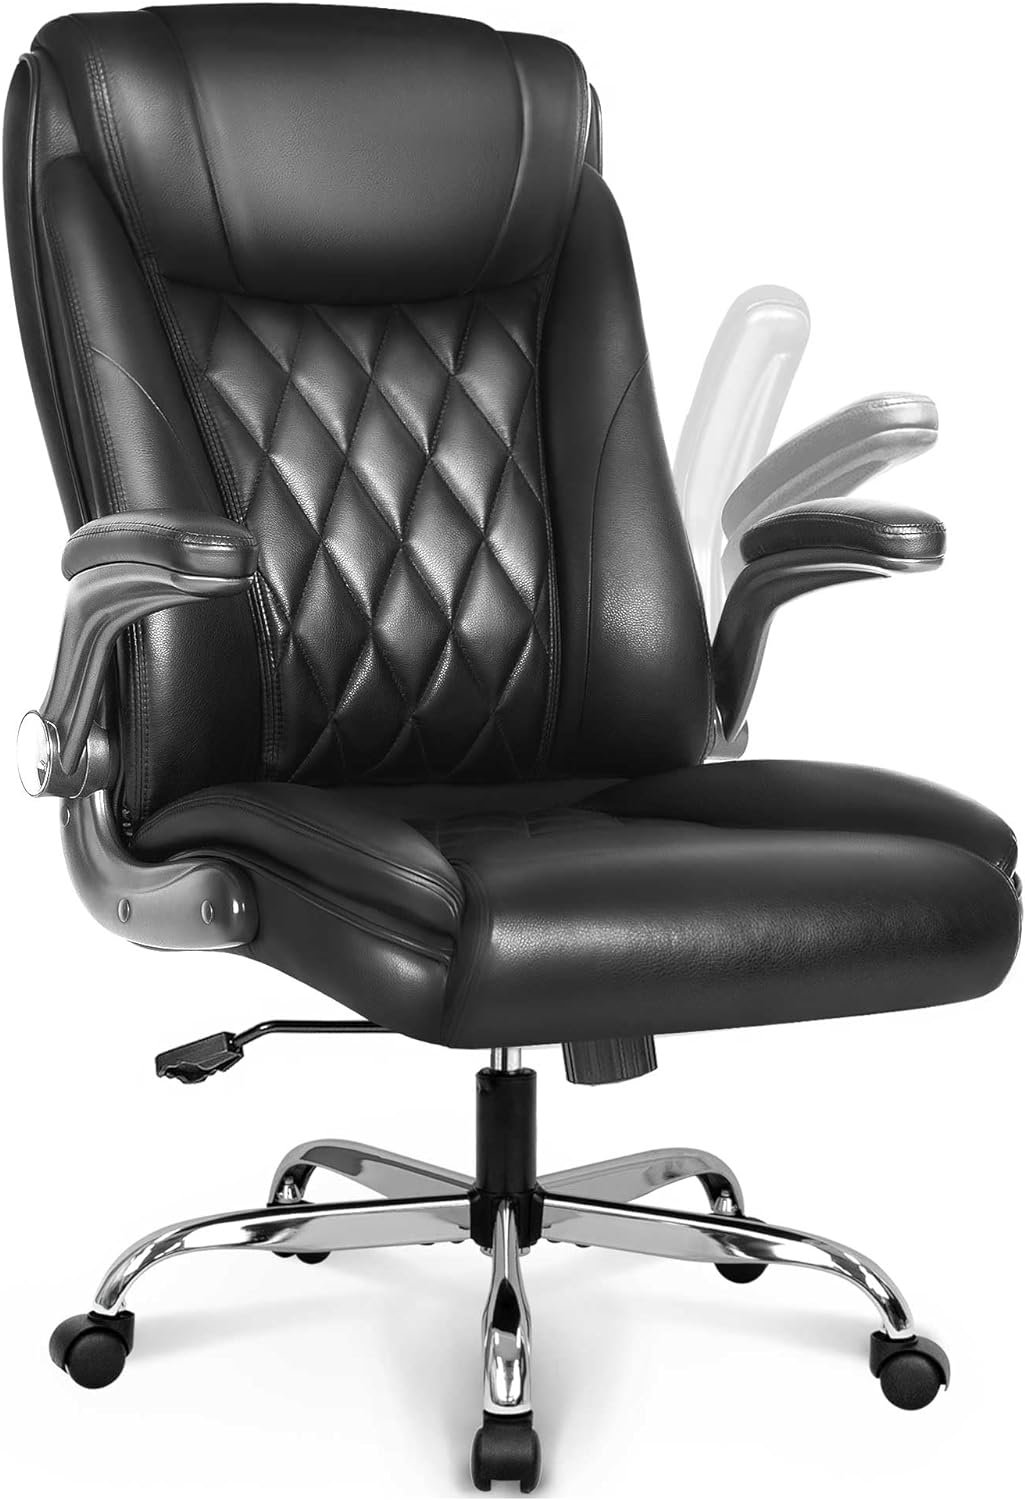 NEO CHAIR Office Chair Computer High Back Adjustable Flip-up Armrests Ergonomic Desk Chair Executive Diamond-Stitched PU Leather Swivel Task Chair with Armrests Lumbar Support (Black)